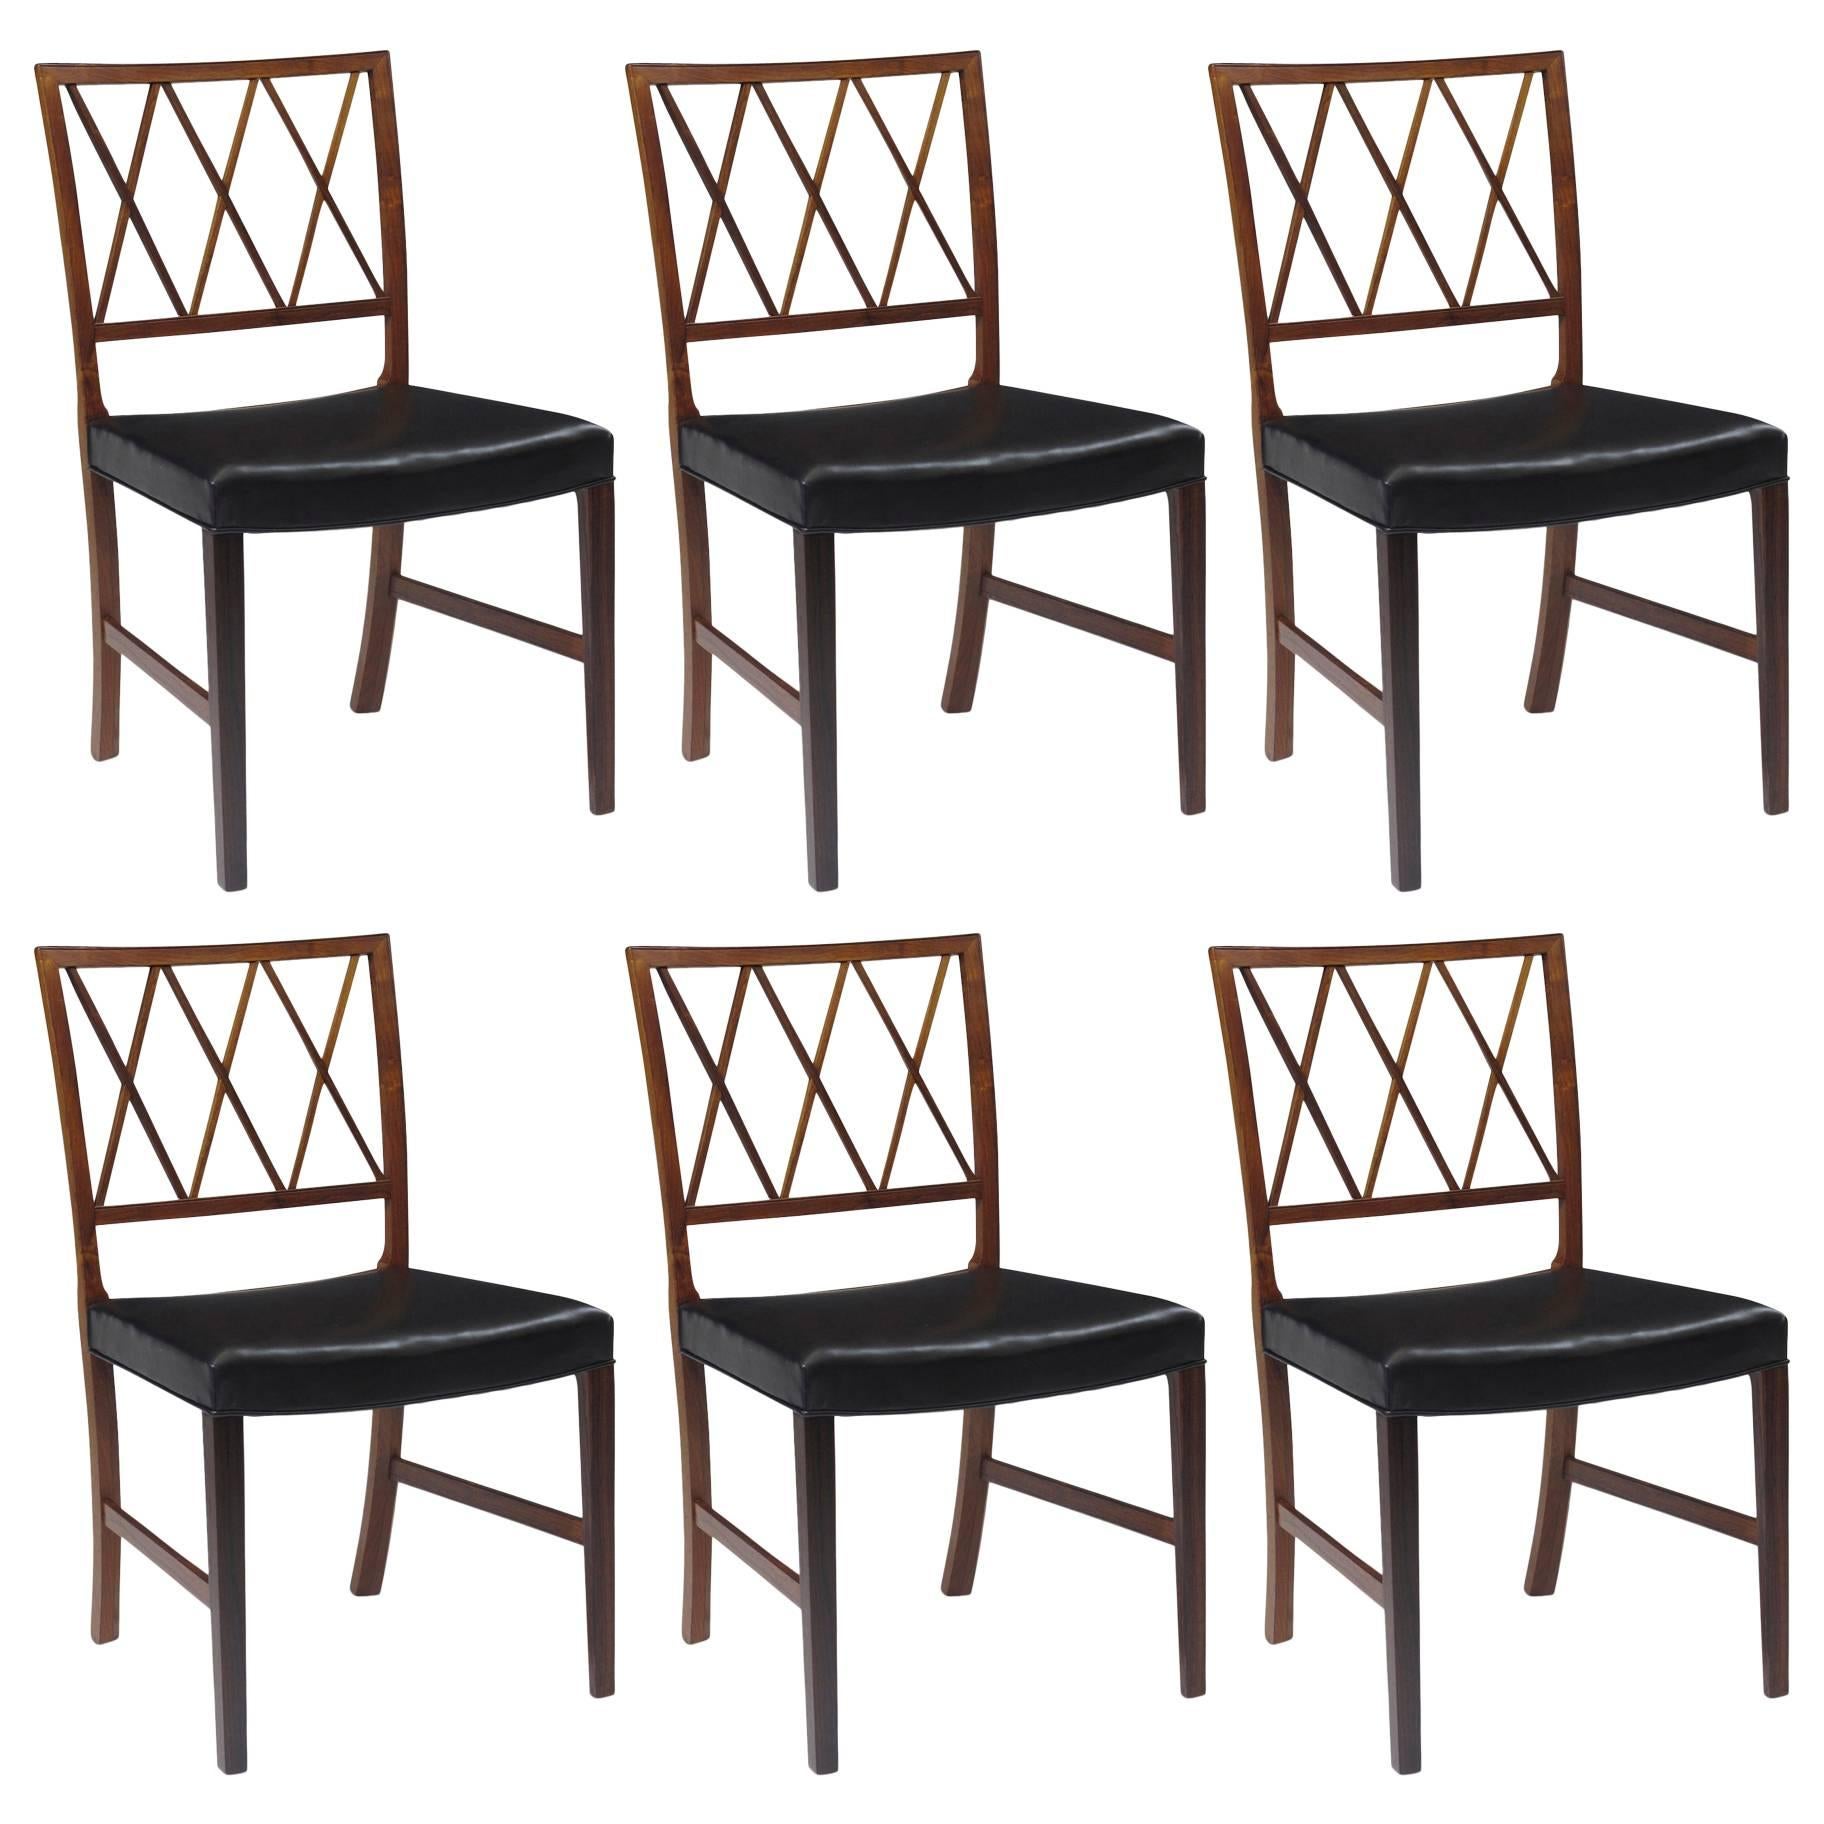 Ole Wanscher for AJ Iversen Rosewood Dining Chairs